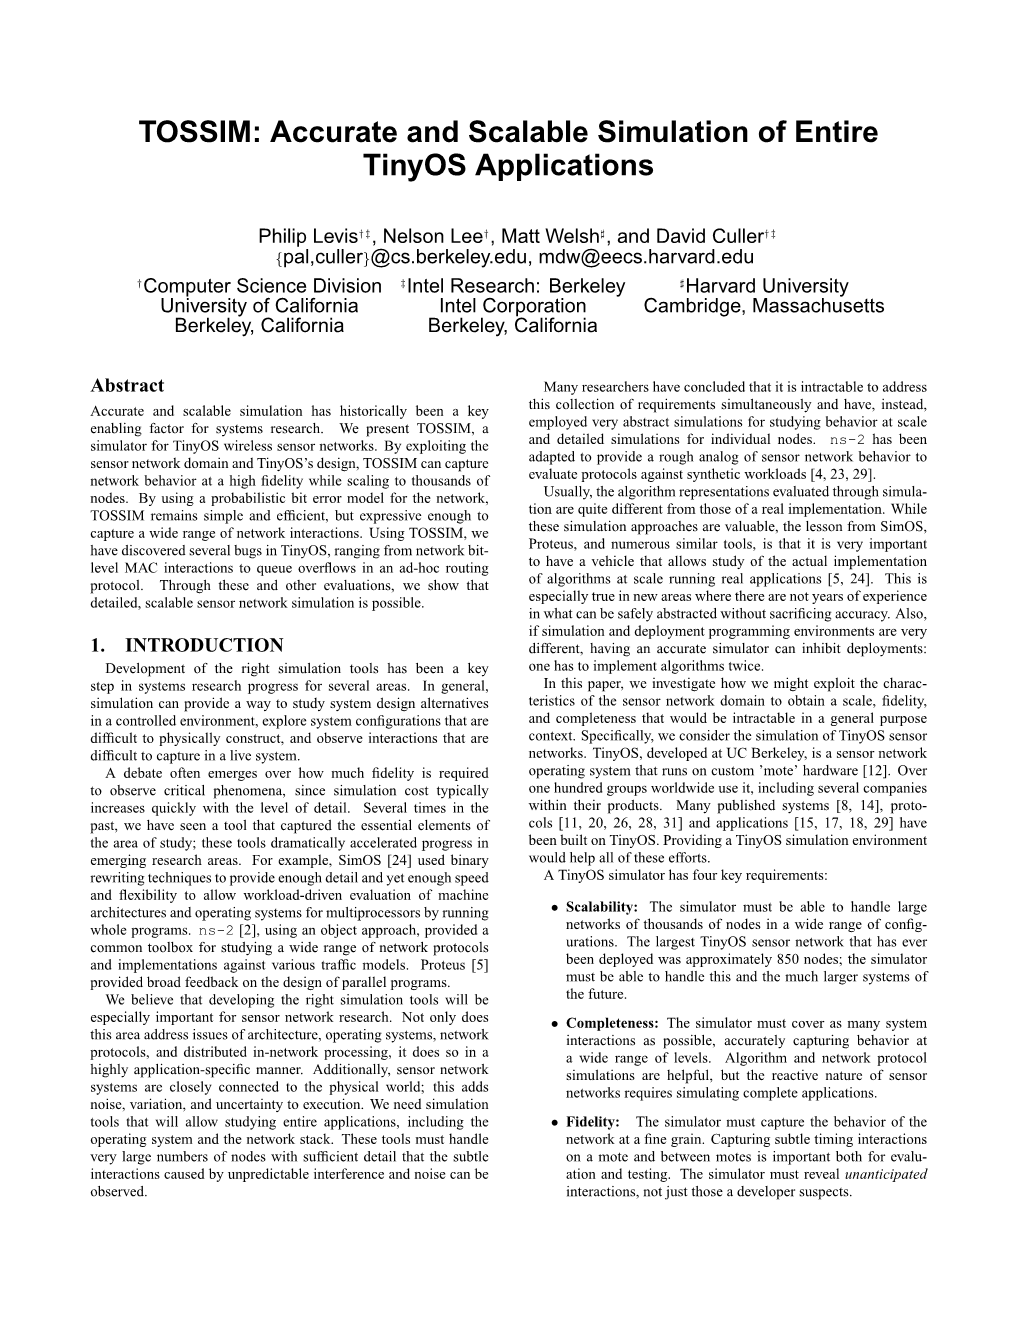 Accurate and Scalable Simulation of Entire Tinyos Applications